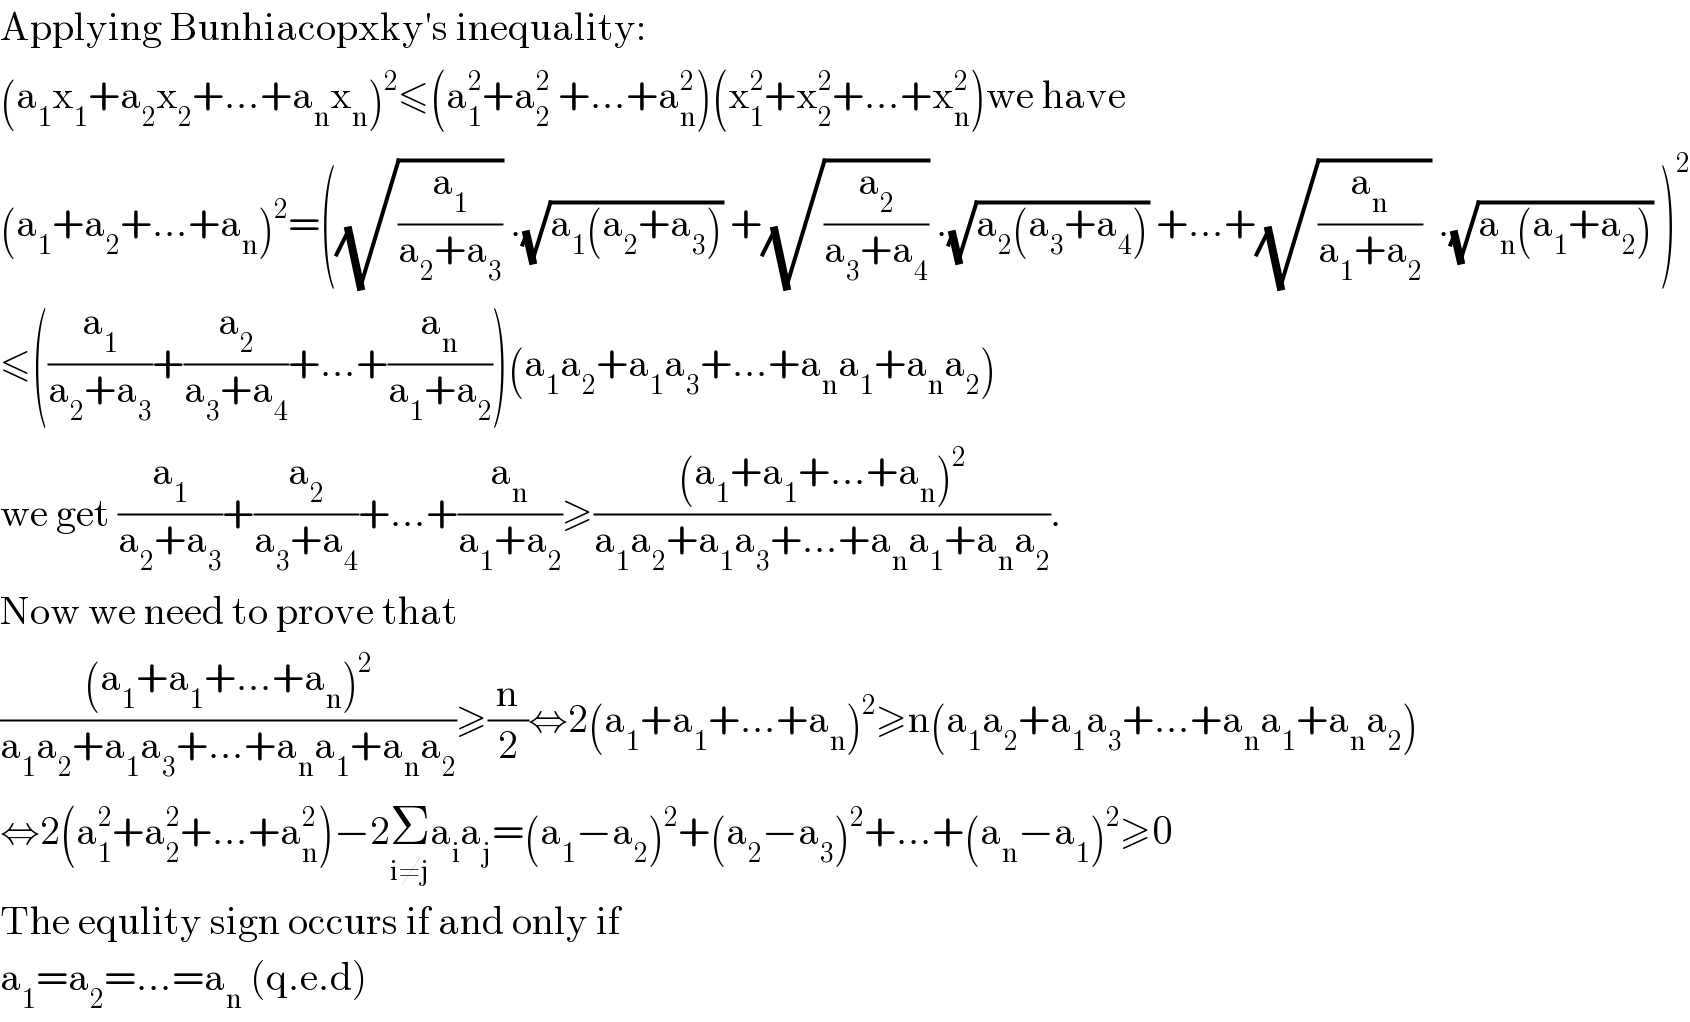 Applying Bunhiacopxky′s inequality:  (a_1 x_1 +a_2 x_2 +...+a_n x_n )^2 ≤(a_1 ^2 +a_2 ^2  +...+a_n ^2 )(x_1 ^2 +x_2 ^2 +...+x_n ^2 )we have  (a_1 +a_2 +...+a_n )^2 =((√(a_1 /(a_2 +a_3 ))) .(√(a_1 (a_2 +a_3 ))) +(√(a_2 /(a_3 +a_4 ))) .(√(a_2 (a_3 +a_4 ))) +...+(√((a_n /(a_1 +a_2 )) )) .(√(a_n (a_1 +a_2 ))) )^2   ≤((a_1 /(a_2 +a_3 ))+(a_2 /(a_3 +a_4 ))+...+(a_n /(a_1 +a_2 )))(a_1 a_2 +a_1 a_3 +...+a_n a_1 +a_n a_2 )  we get (a_1 /(a_2 +a_3 ))+(a_2 /(a_3 +a_4 ))+...+(a_n /(a_1 +a_2 ))≥(((a_1 +a_1 +...+a_n )^2 )/(a_1 a_2 +a_1 a_3 +...+a_n a_1 +a_n a_2 )).  Now we need to prove that   (((a_1 +a_1 +...+a_n )^2 )/(a_1 a_2 +a_1 a_3 +...+a_n a_1 +a_n a_2 ))≥(n/2)⇔2(a_1 +a_1 +...+a_n )^2 ≥n(a_1 a_2 +a_1 a_3 +...+a_n a_1 +a_n a_2 )  ⇔2(a_1 ^2 +a_2 ^2 +...+a_n ^2 )−2Σ_(i≠j) a_i a_j =(a_1 −a_2 )^2 +(a_2 −a_3 )^2 +...+(a_n −a_1 )^2 ≥0  The equlity sign occurs if and only if   a_1 =a_2 =...=a_n  (q.e.d)  